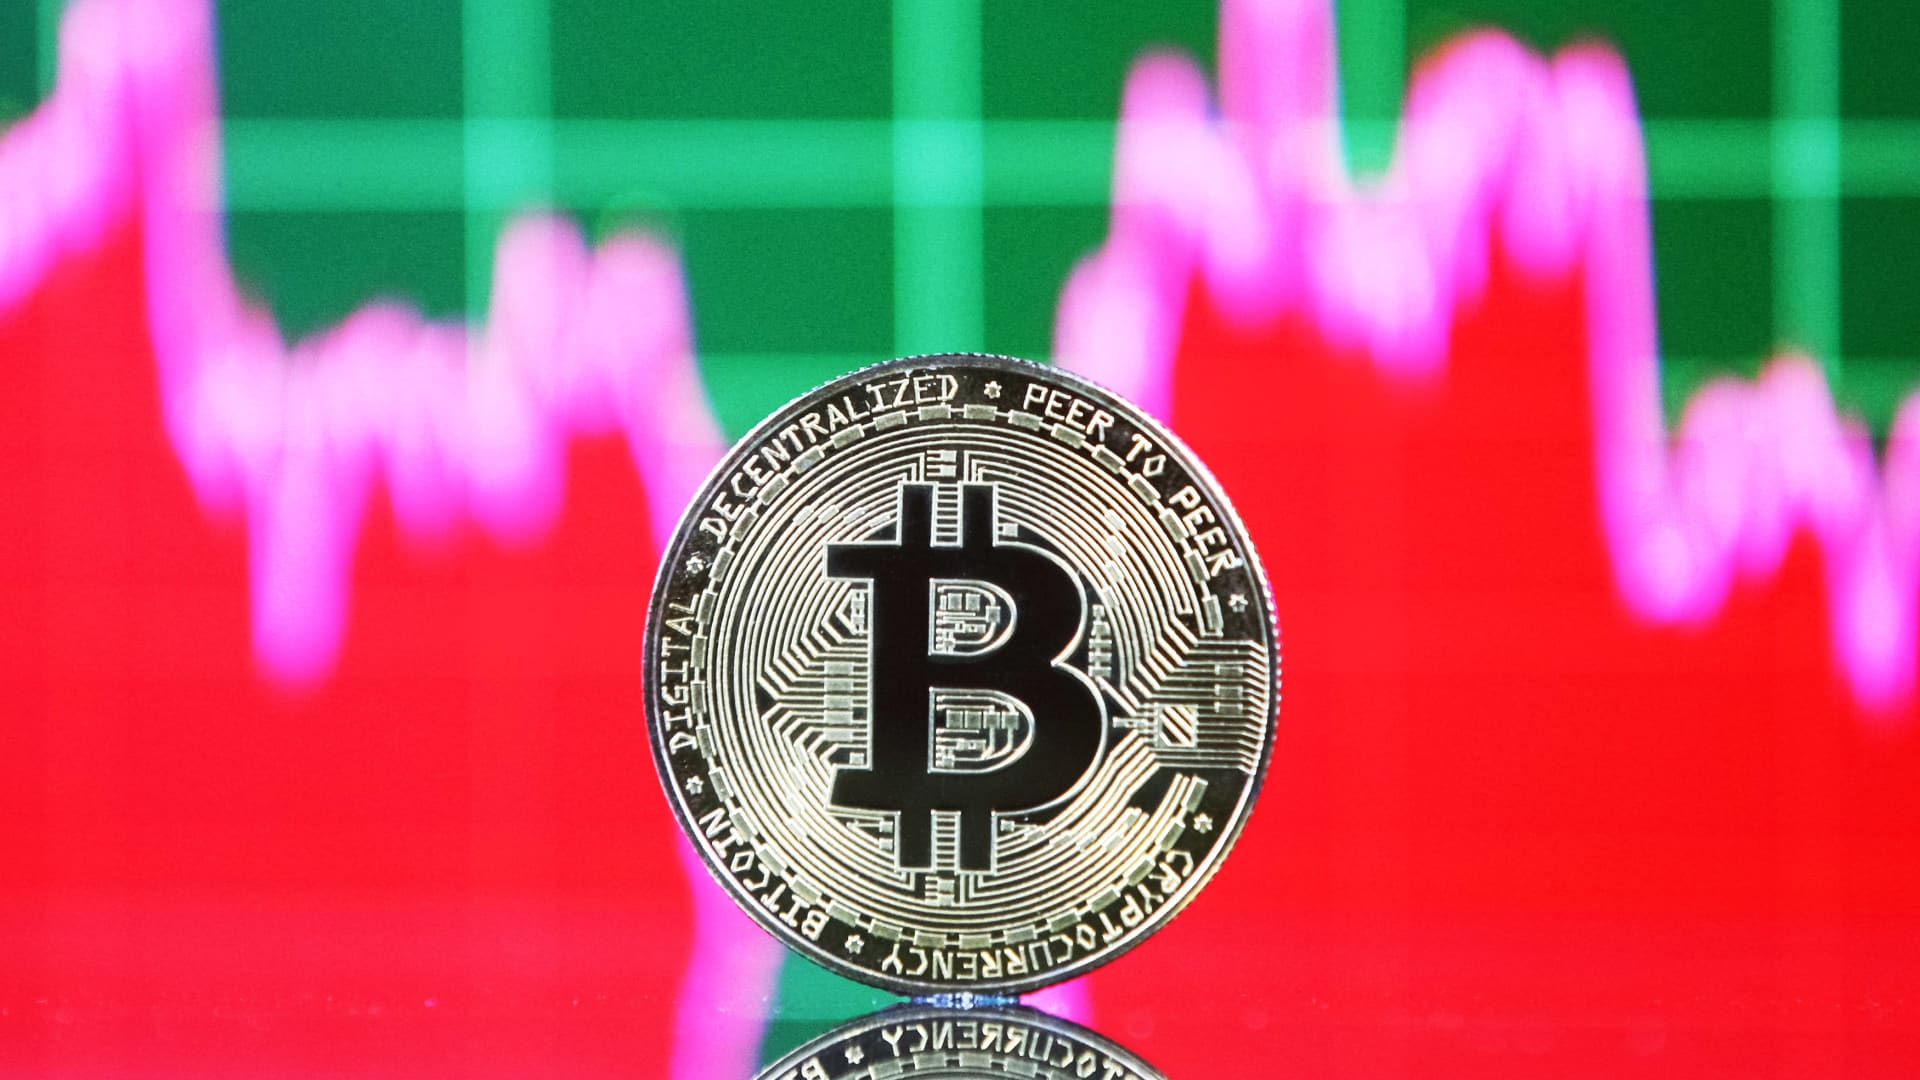 Bitcoin bounces back after falling to new 2022 lows over the weekend